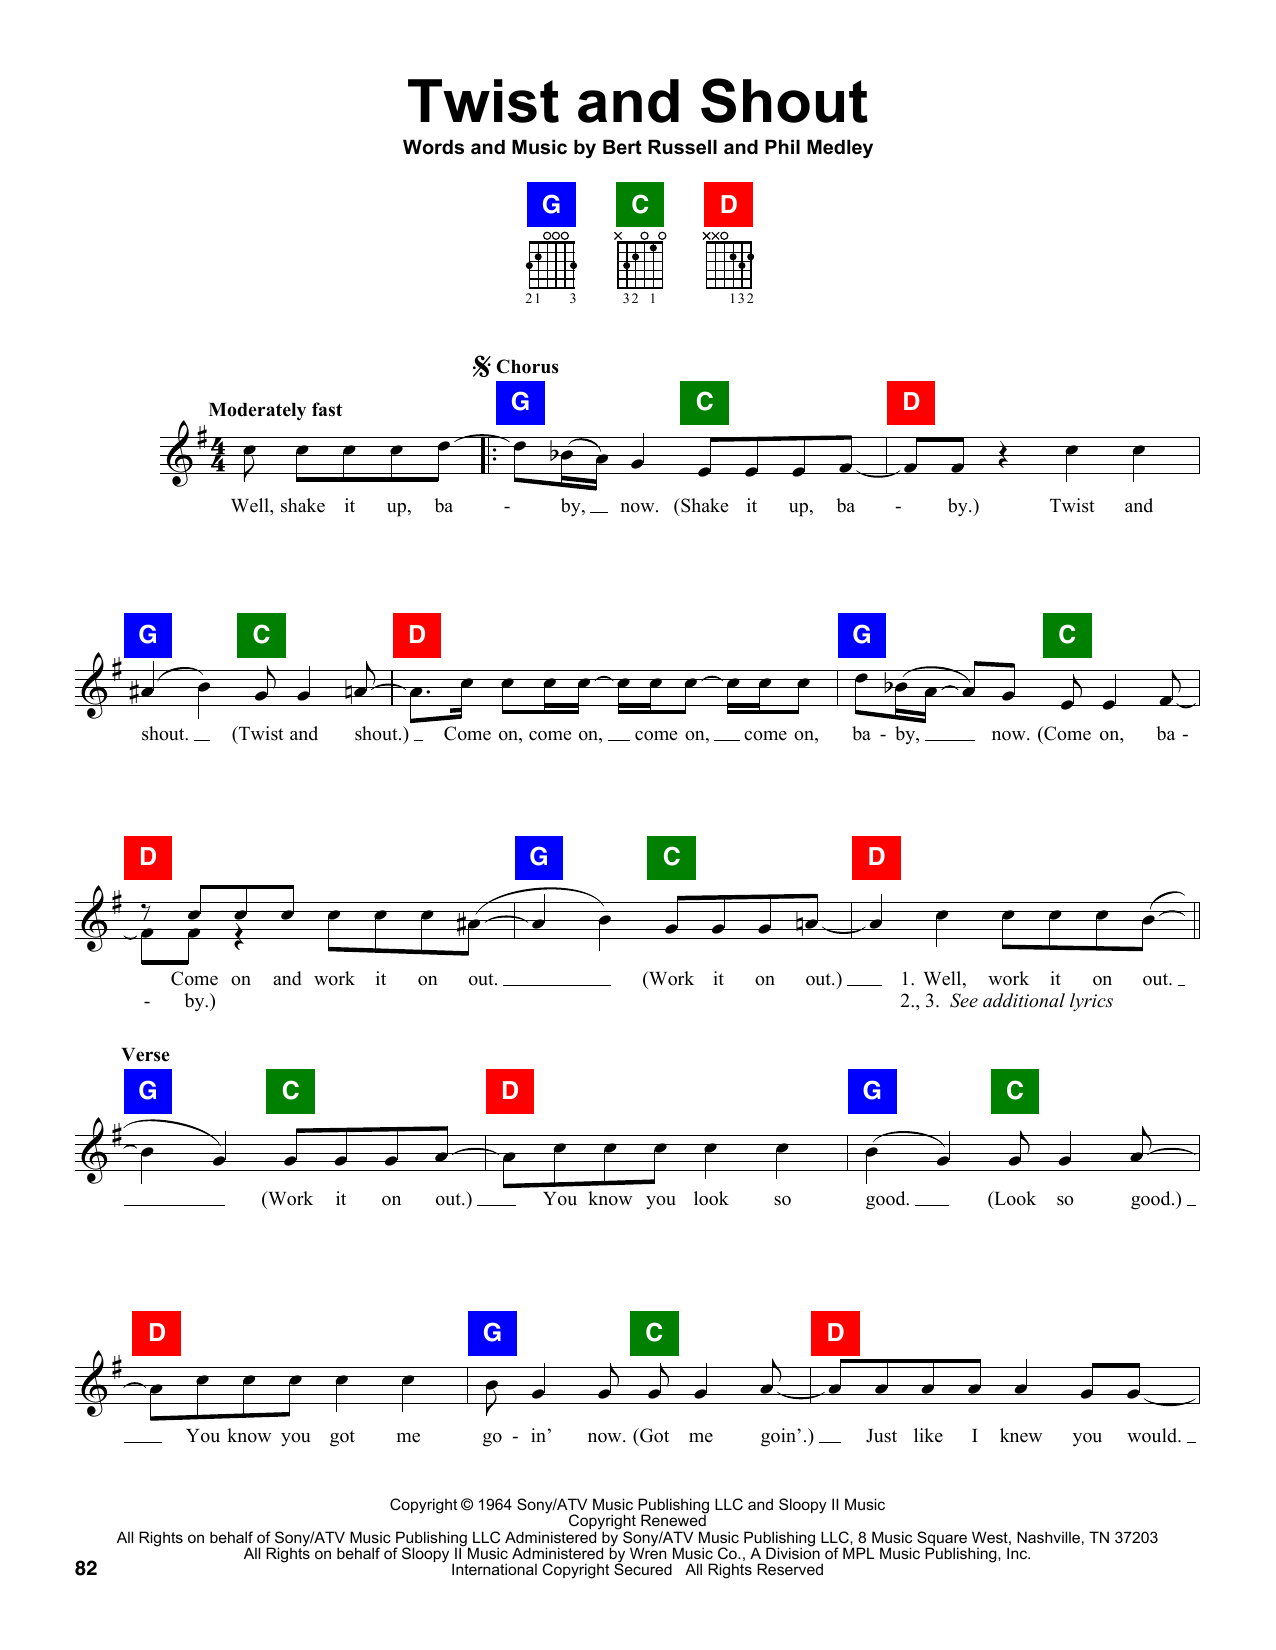 Download The Beatles Twist And Shout Sheet Music